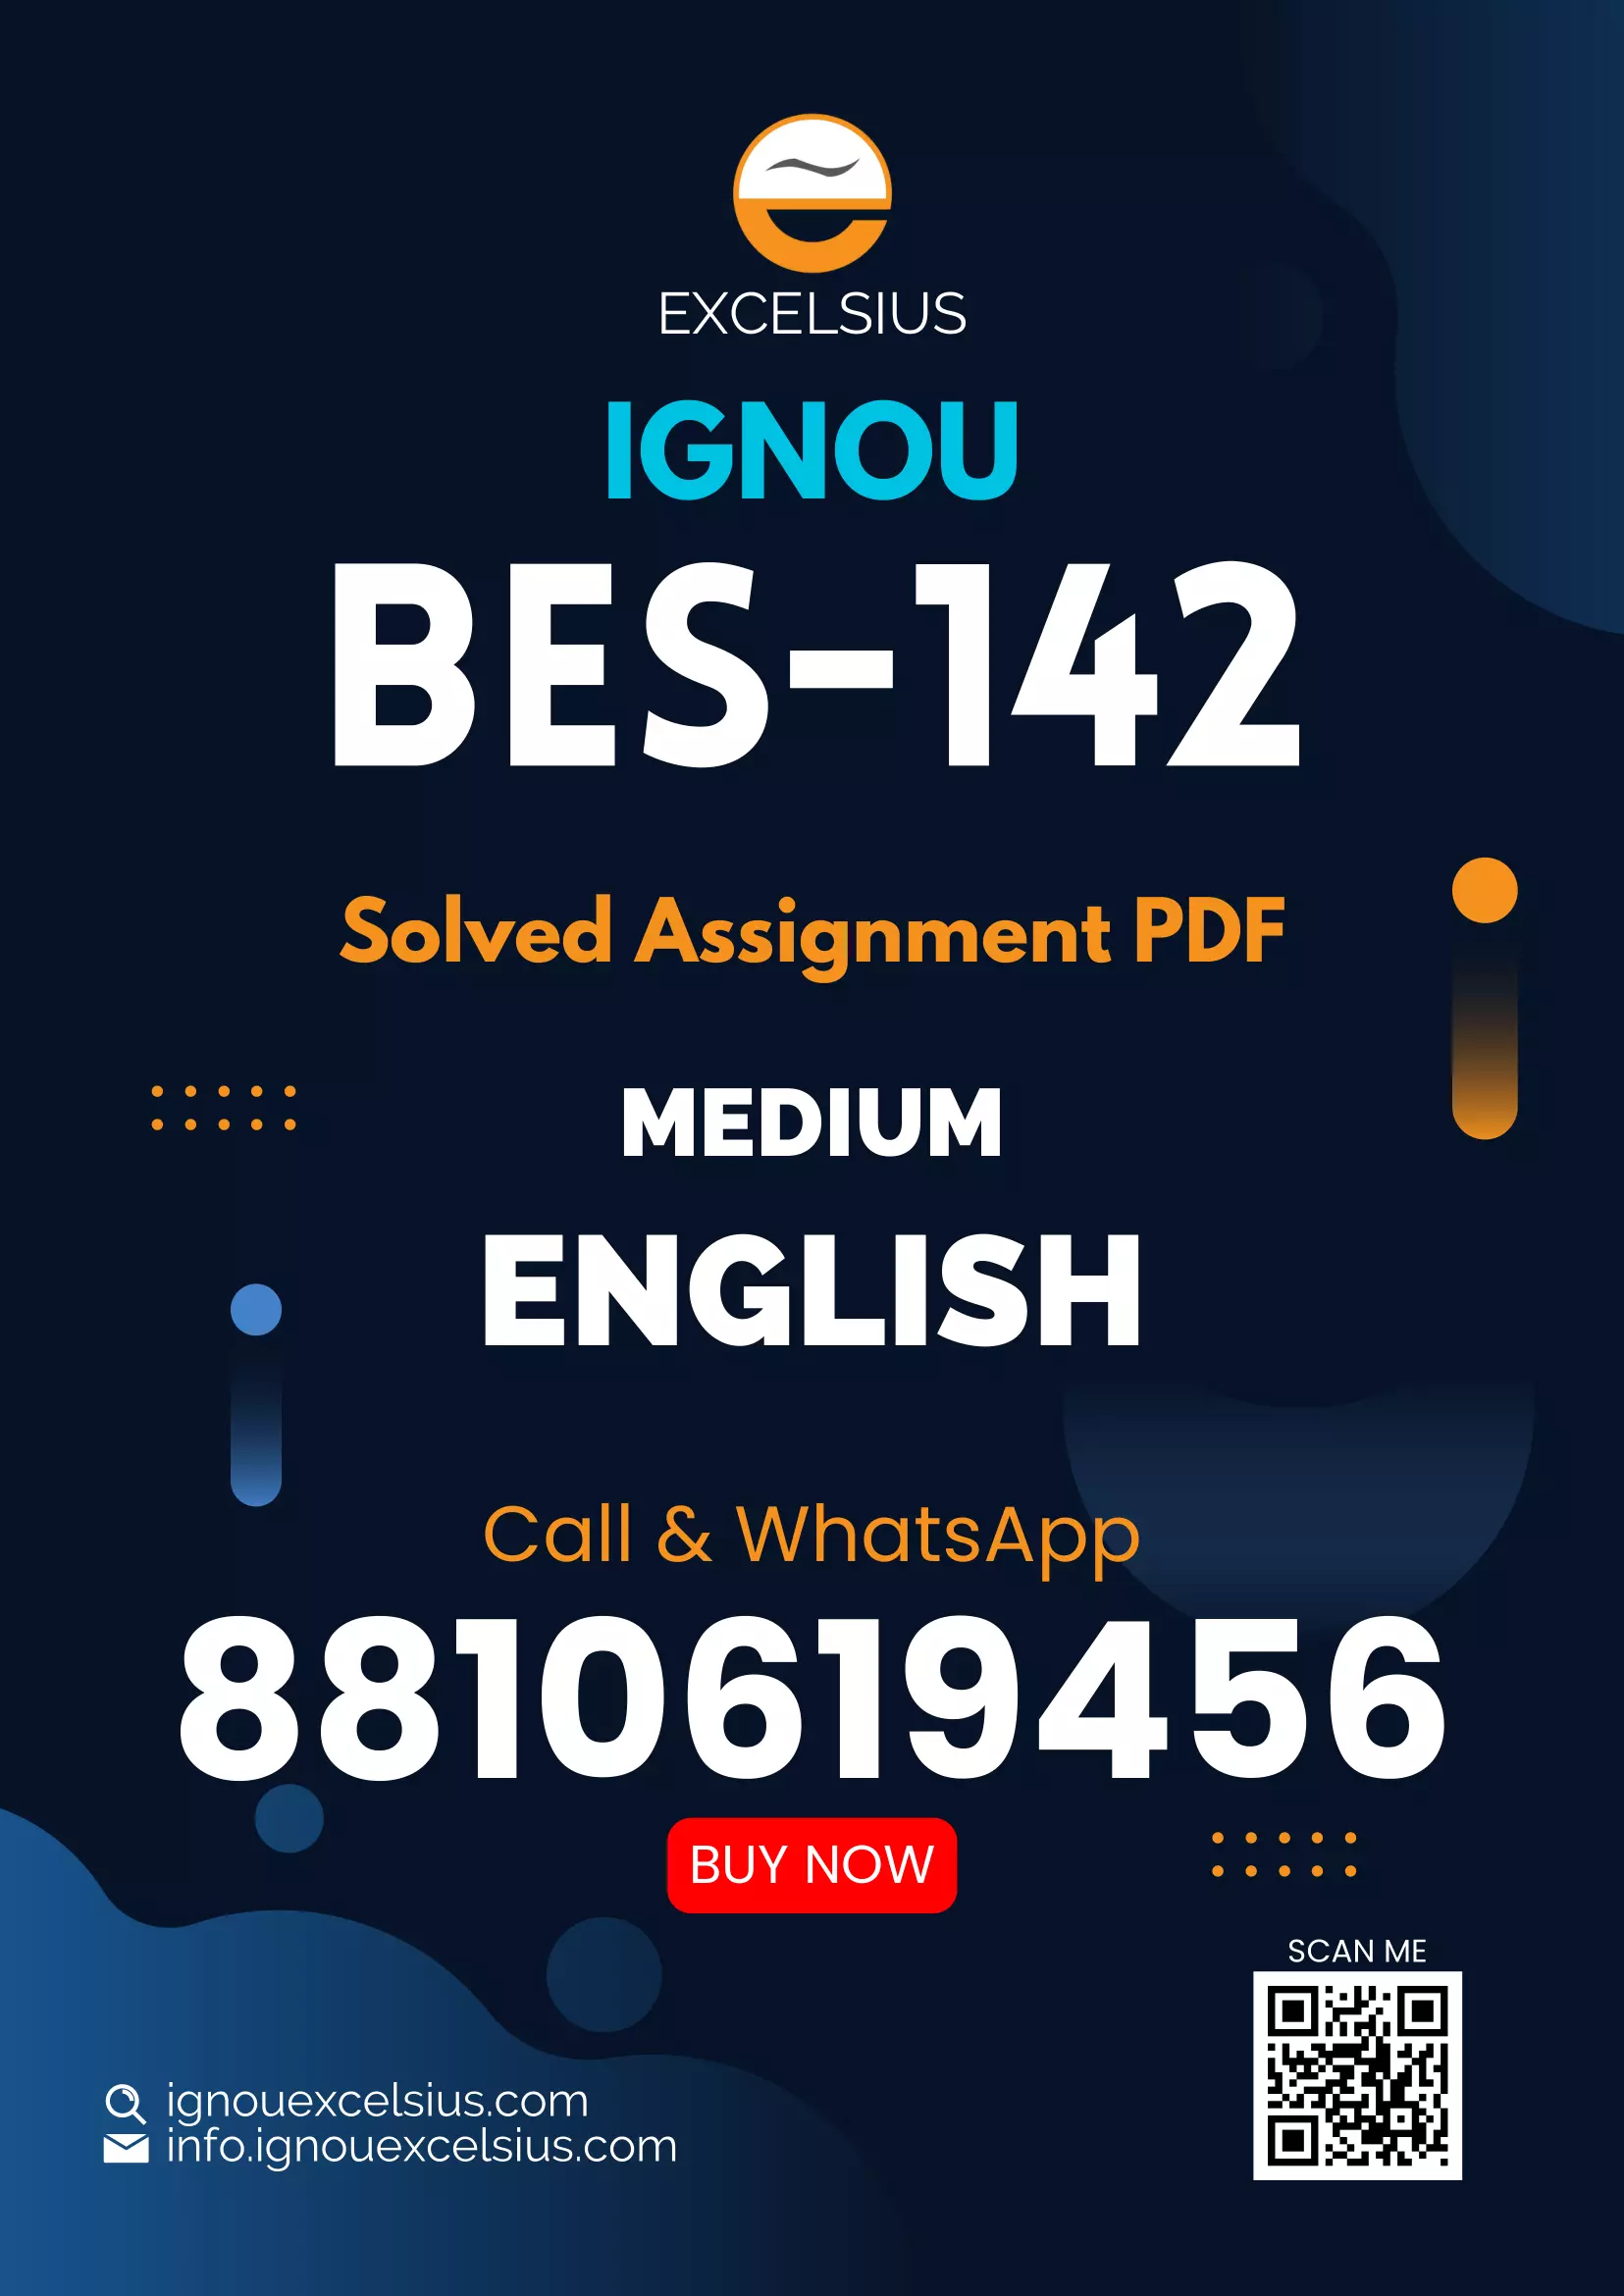 IGNOU BES-142 - Pedagogy of Science, Latest Solved Assignment-January 2021 - July 2021